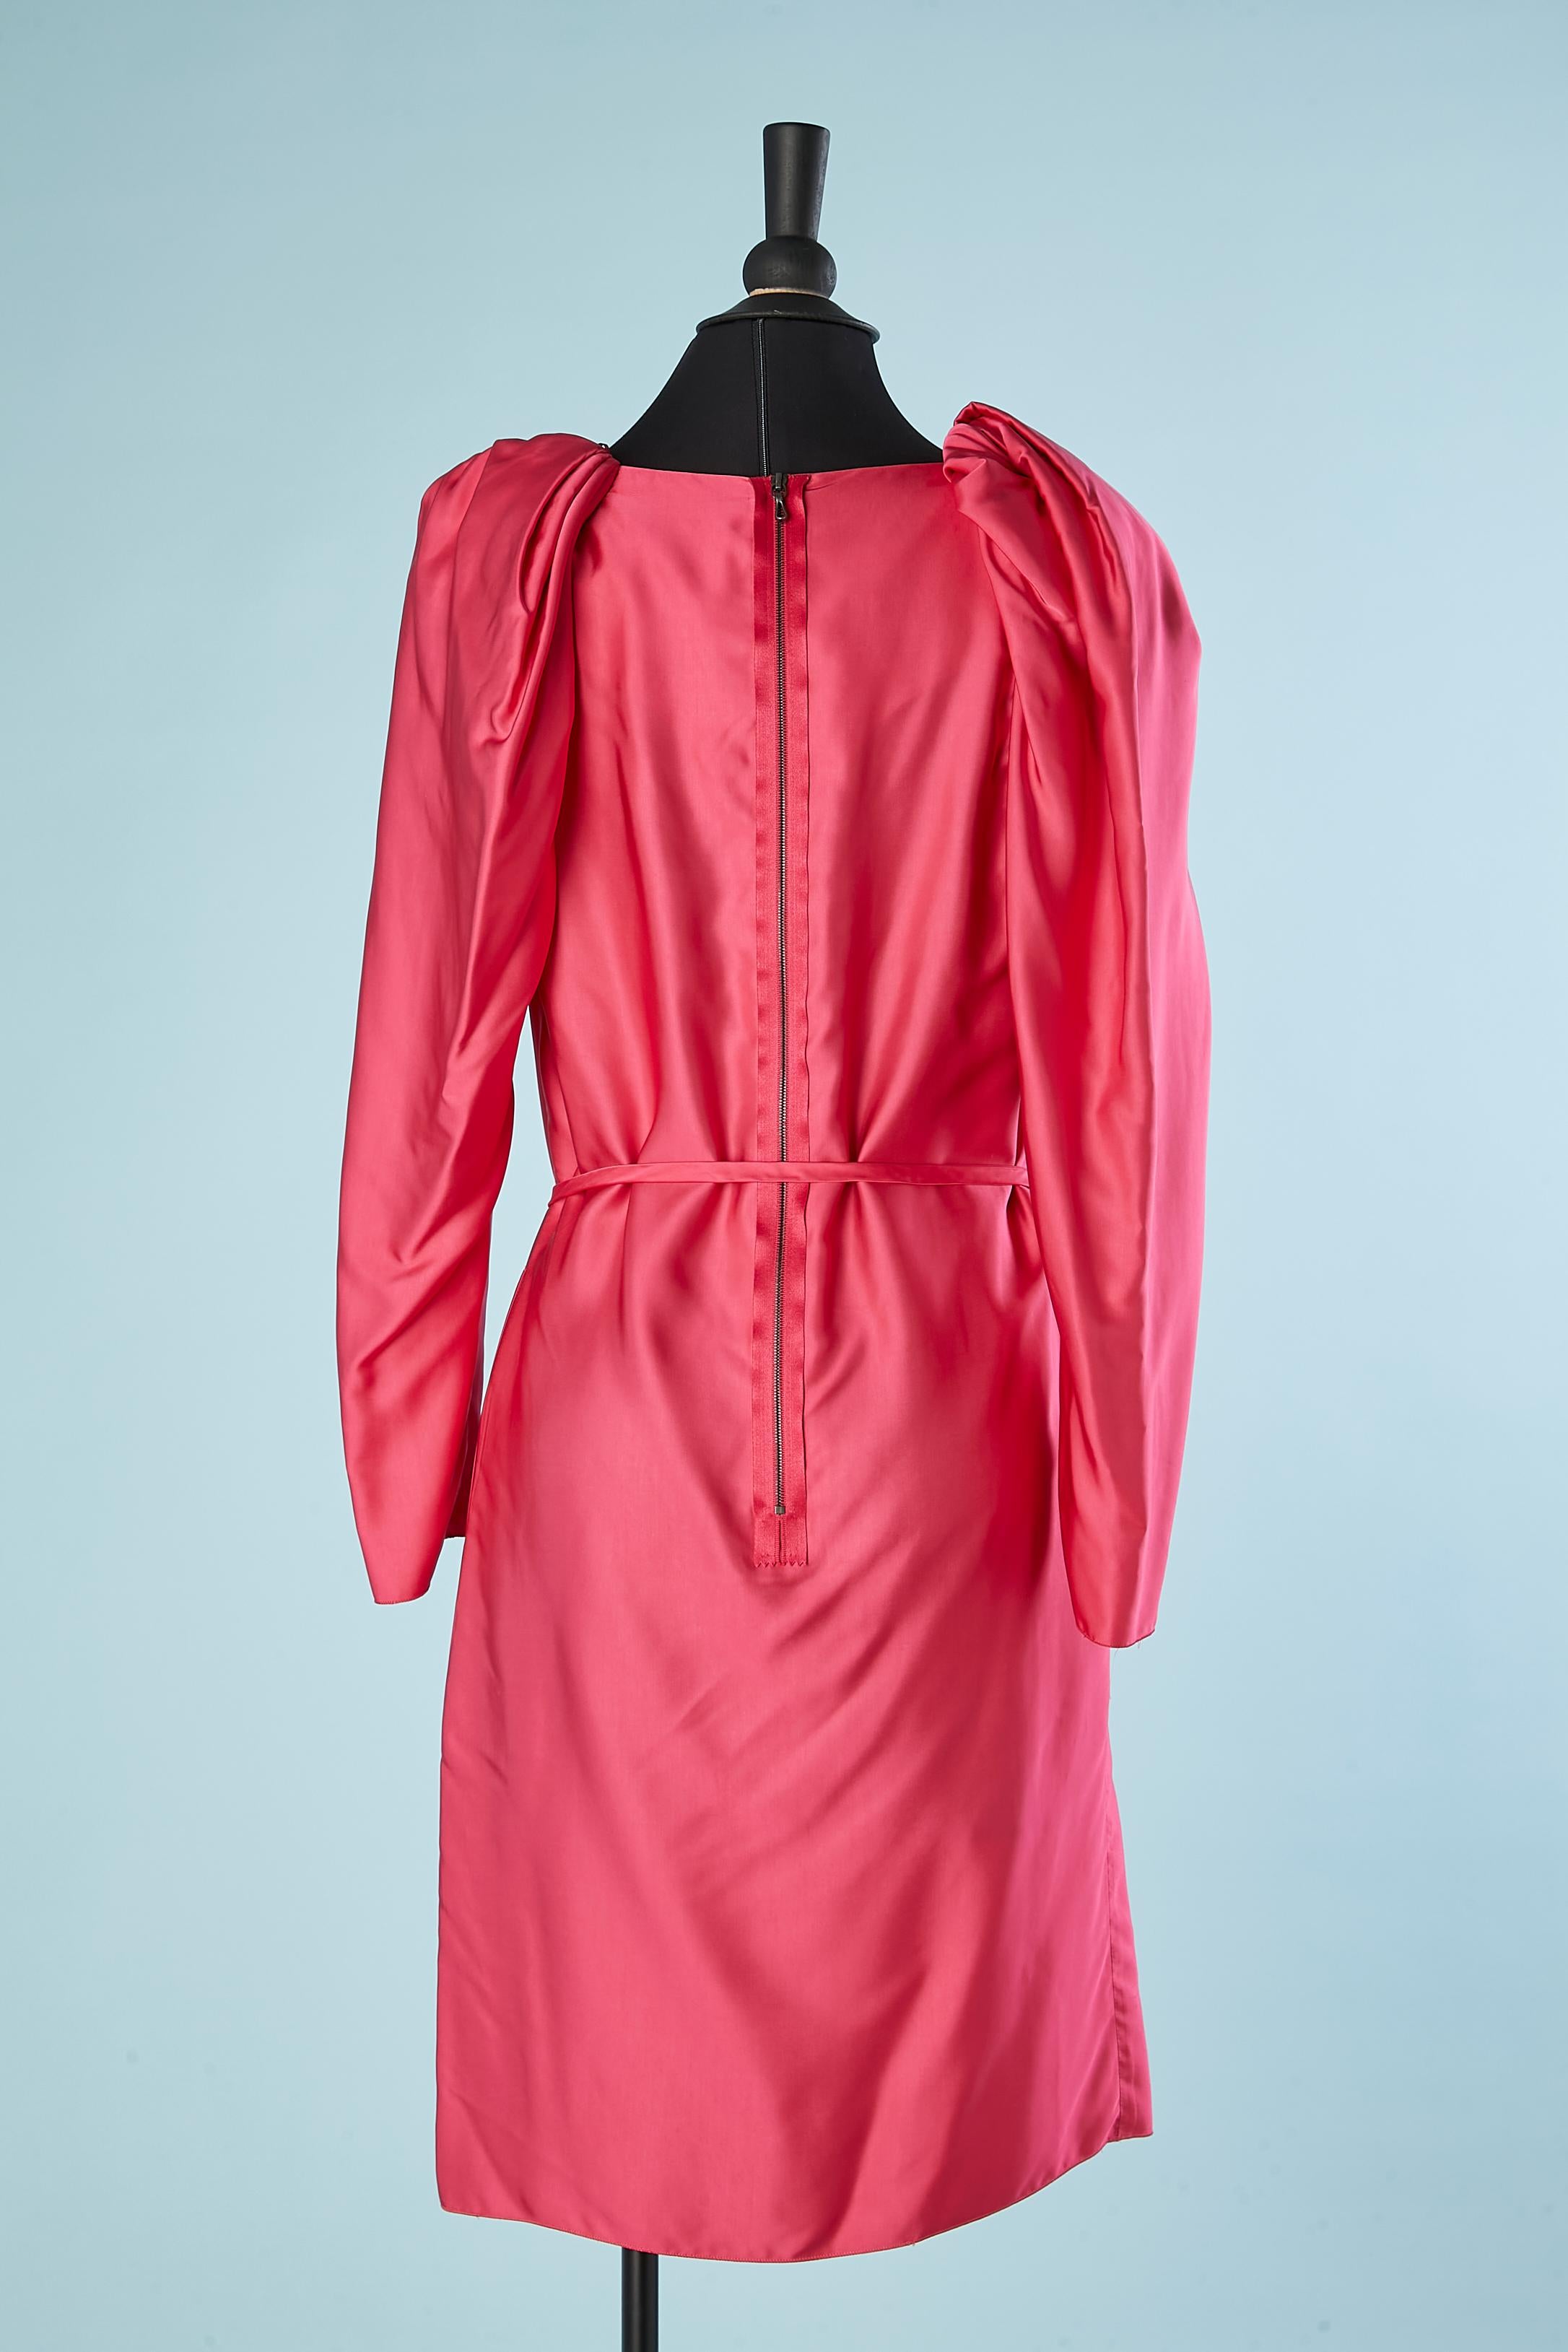 Women's Fushia rayon cocktail dress  drape on the shoulders and belt Lanvin by A .Elbaz  For Sale